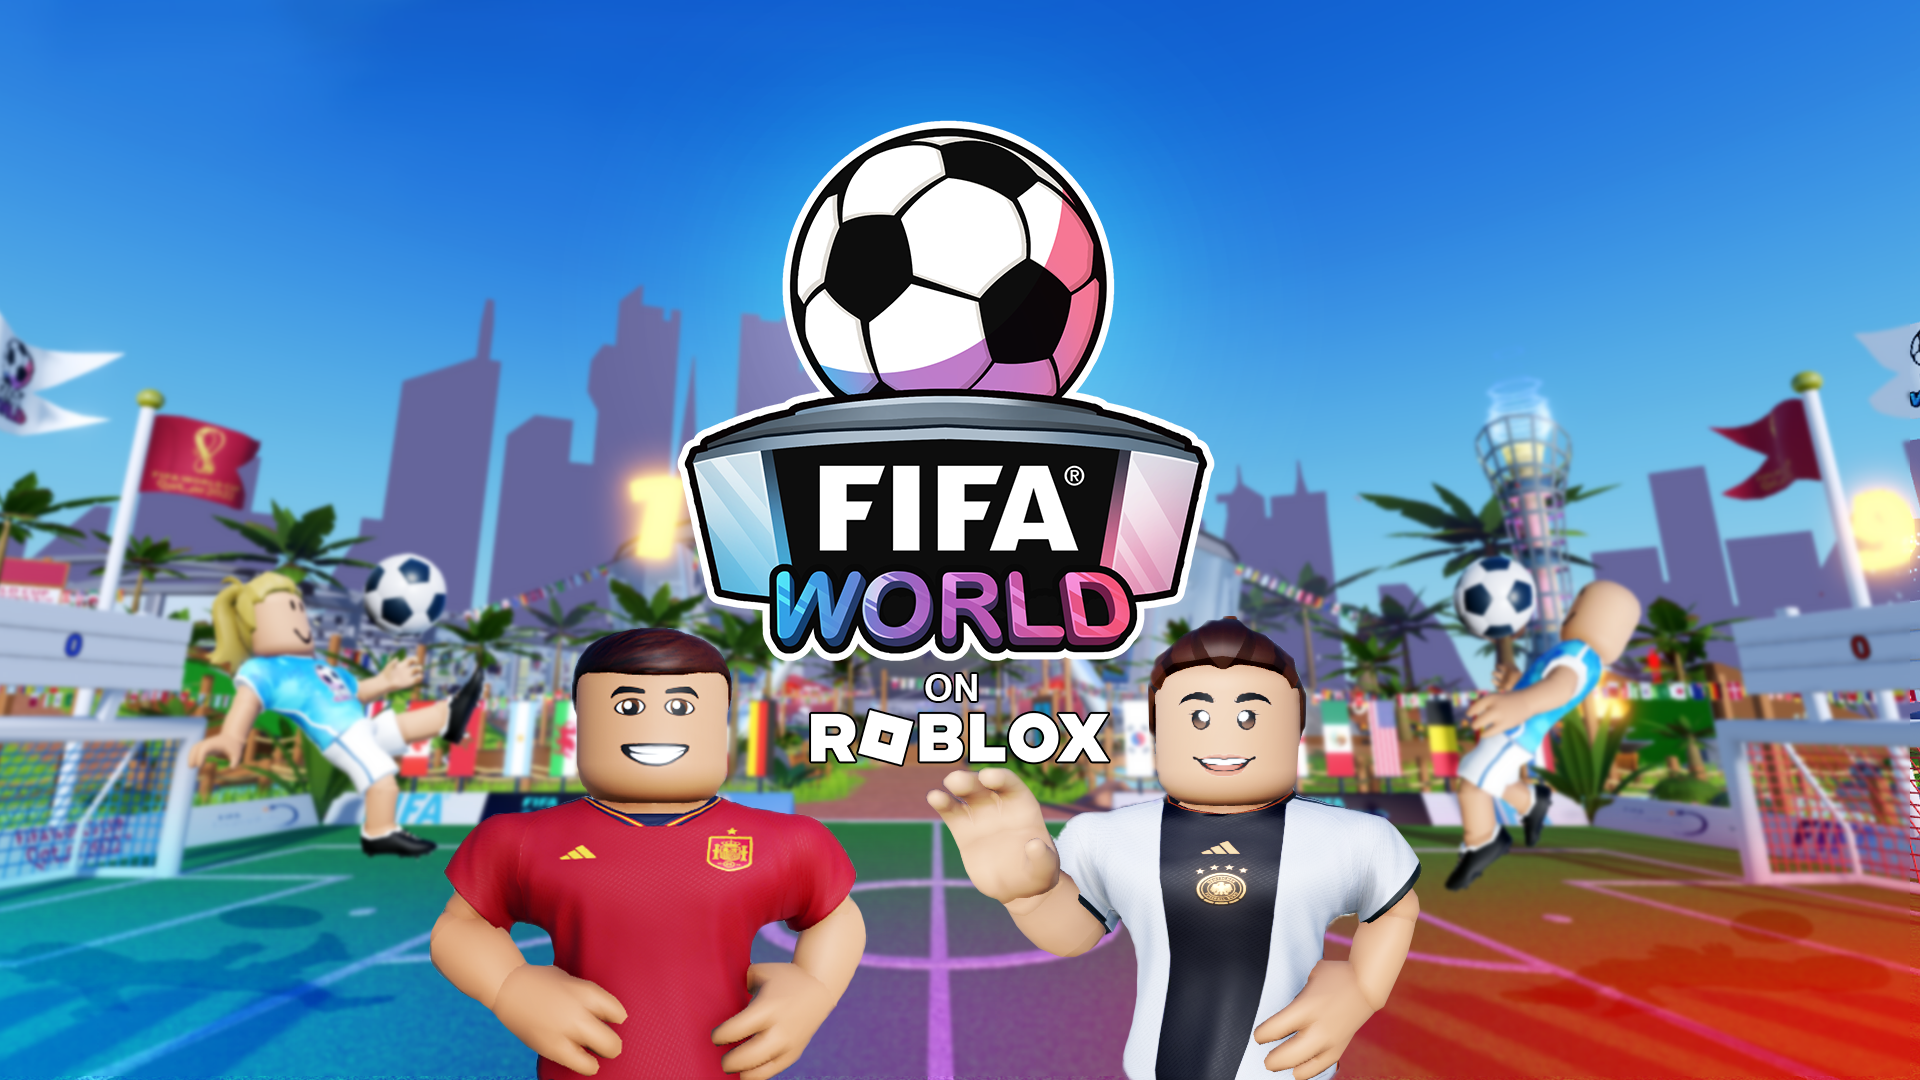 FIFA and Roblox announce landmark partnership as FIFA World officially launches